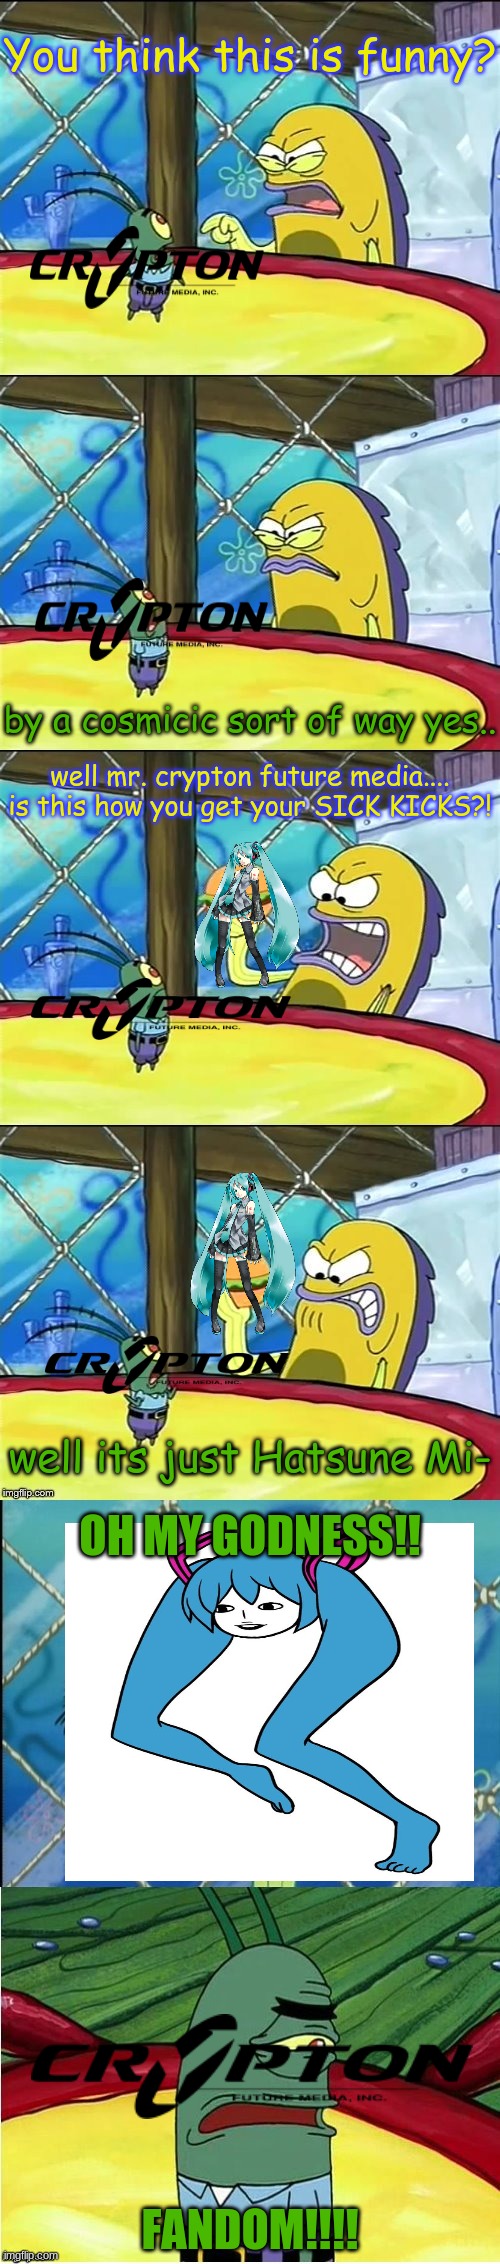 Oh no the fandom made Hatsune Miku look like cringe | You think this is funny? by a cosmicic sort of way yes.. well mr. crypton future media.... is this how you get your SICK KICKS?! well its just Hatsune Mi-; OH MY GODNESS!! FANDOM!!!! | image tagged in oh my goodness,spongebob,meme,vocaloid,hatsune miku | made w/ Imgflip meme maker